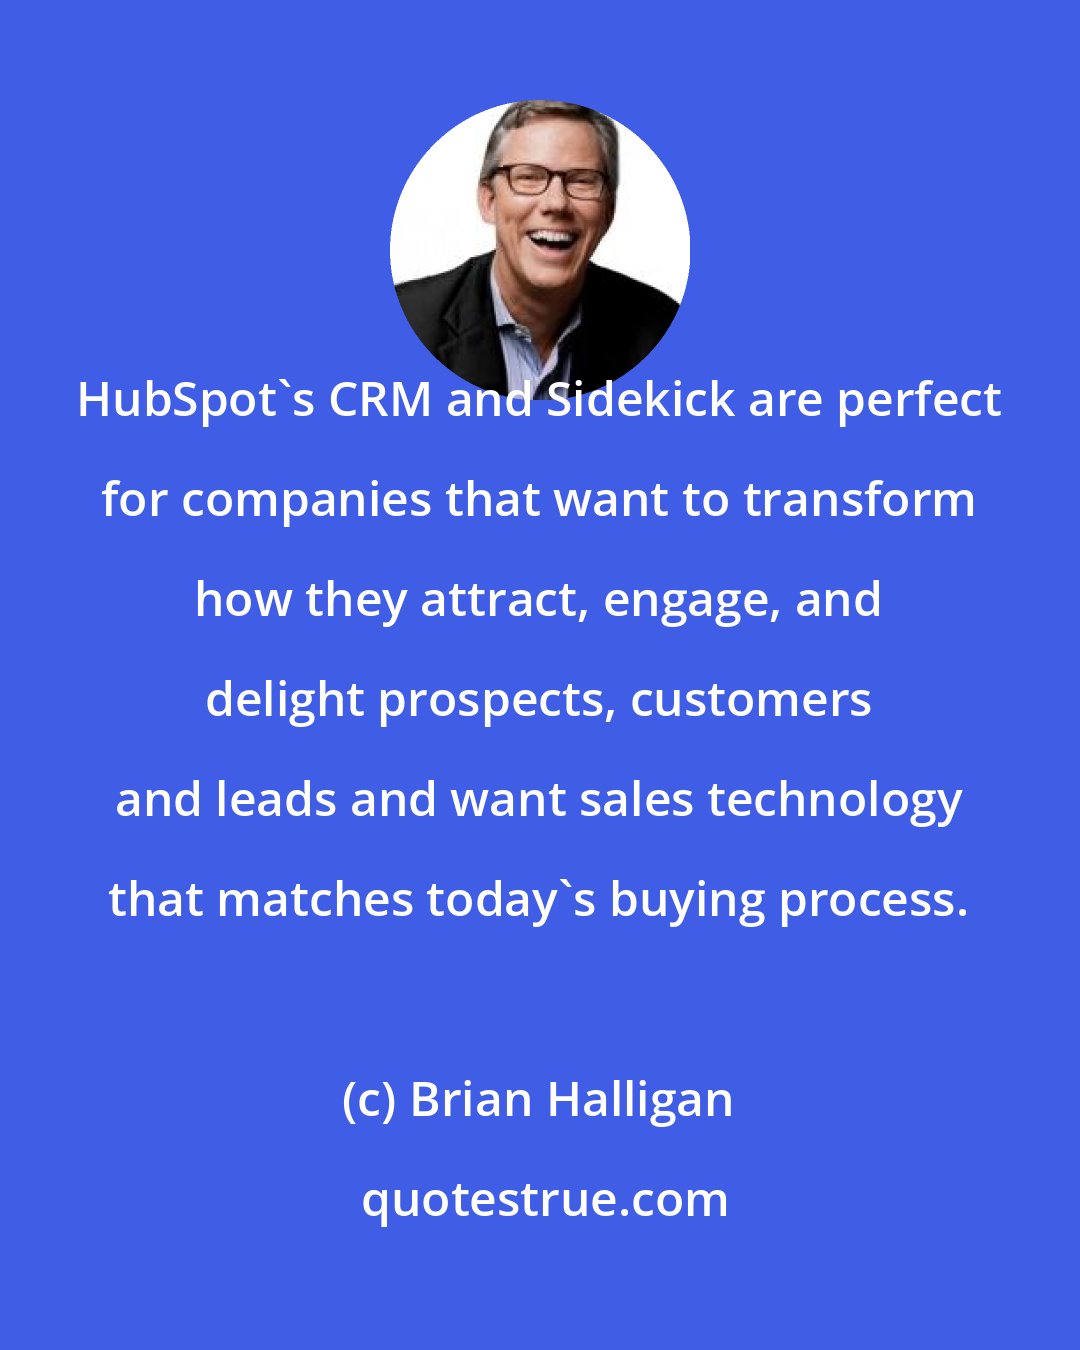 Brian Halligan: HubSpot's CRM and Sidekick are perfect for companies that want to transform how they attract, engage, and delight prospects, customers and leads and want sales technology that matches today's buying process.